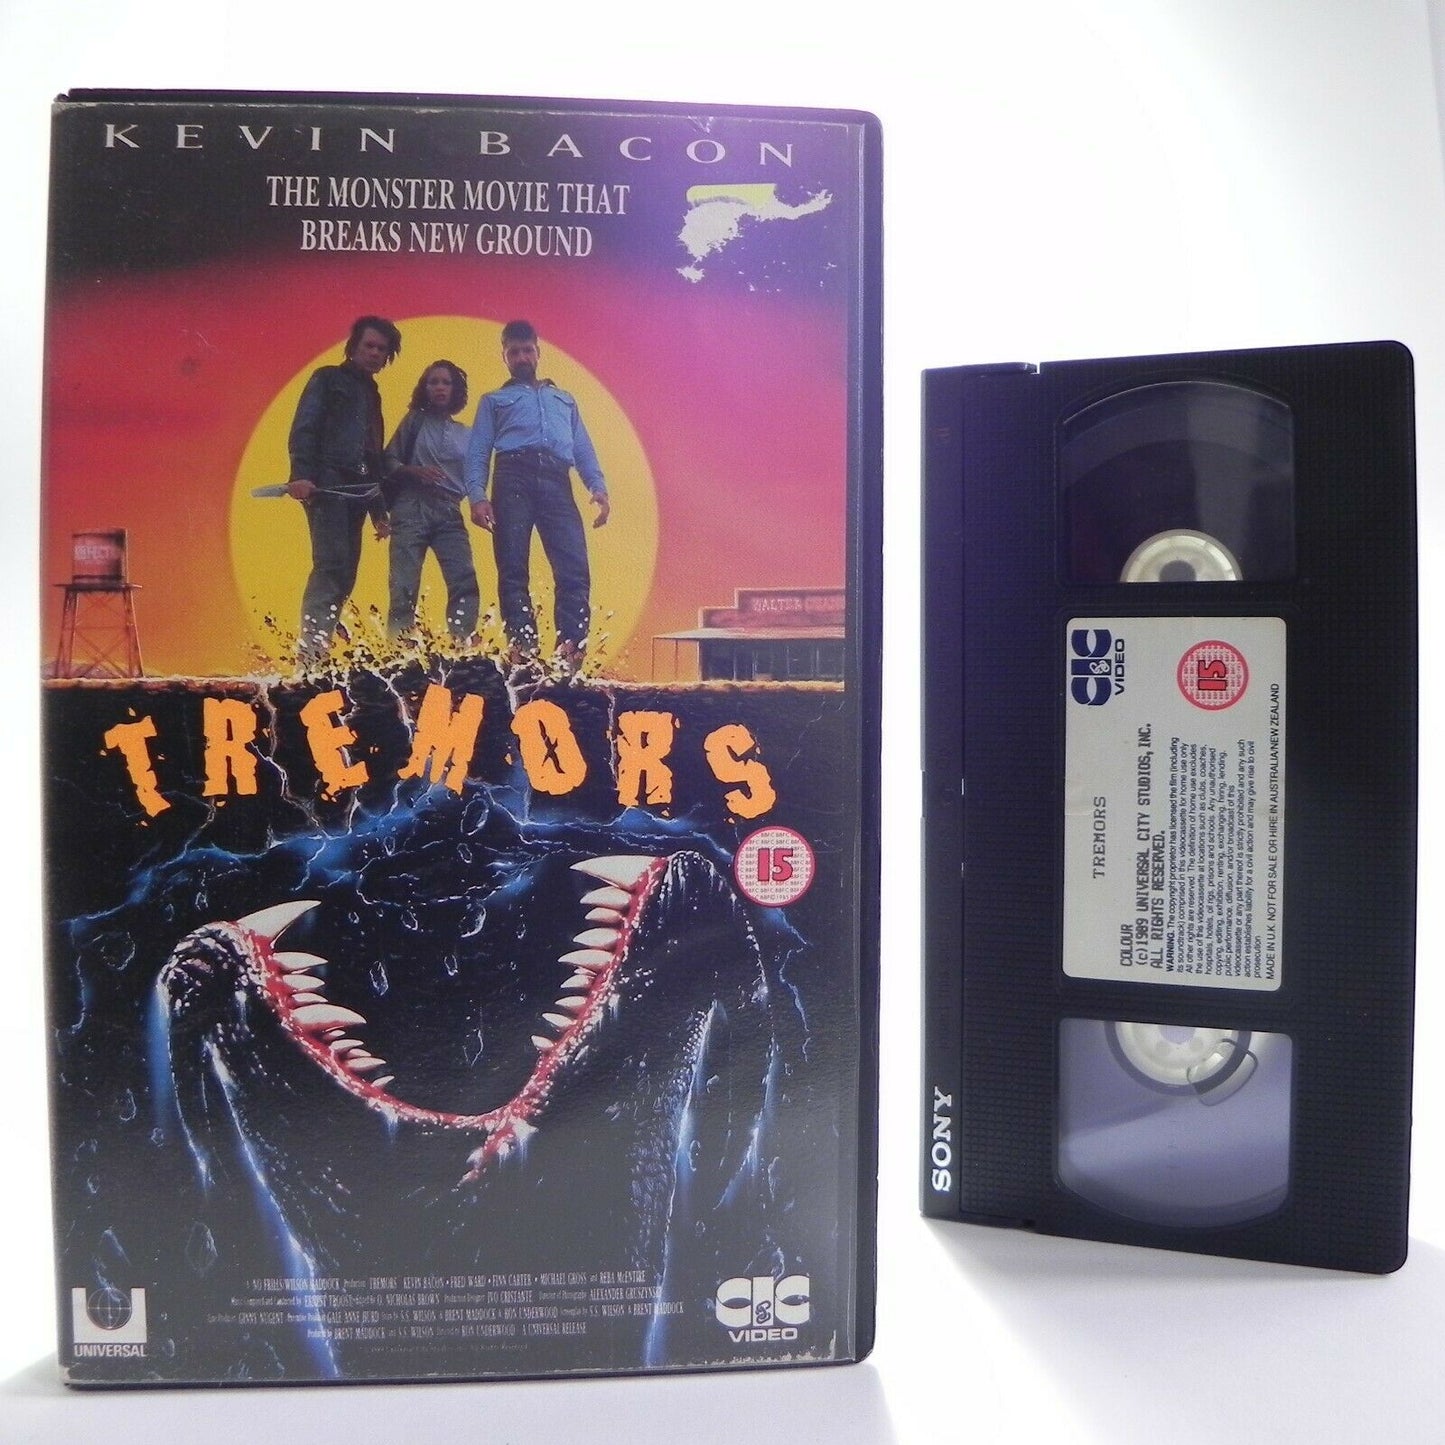 Tremors: (1989) CIC Video - Large Box - Sci-Fi - Creature Comedy - K.Bacon - VHS-